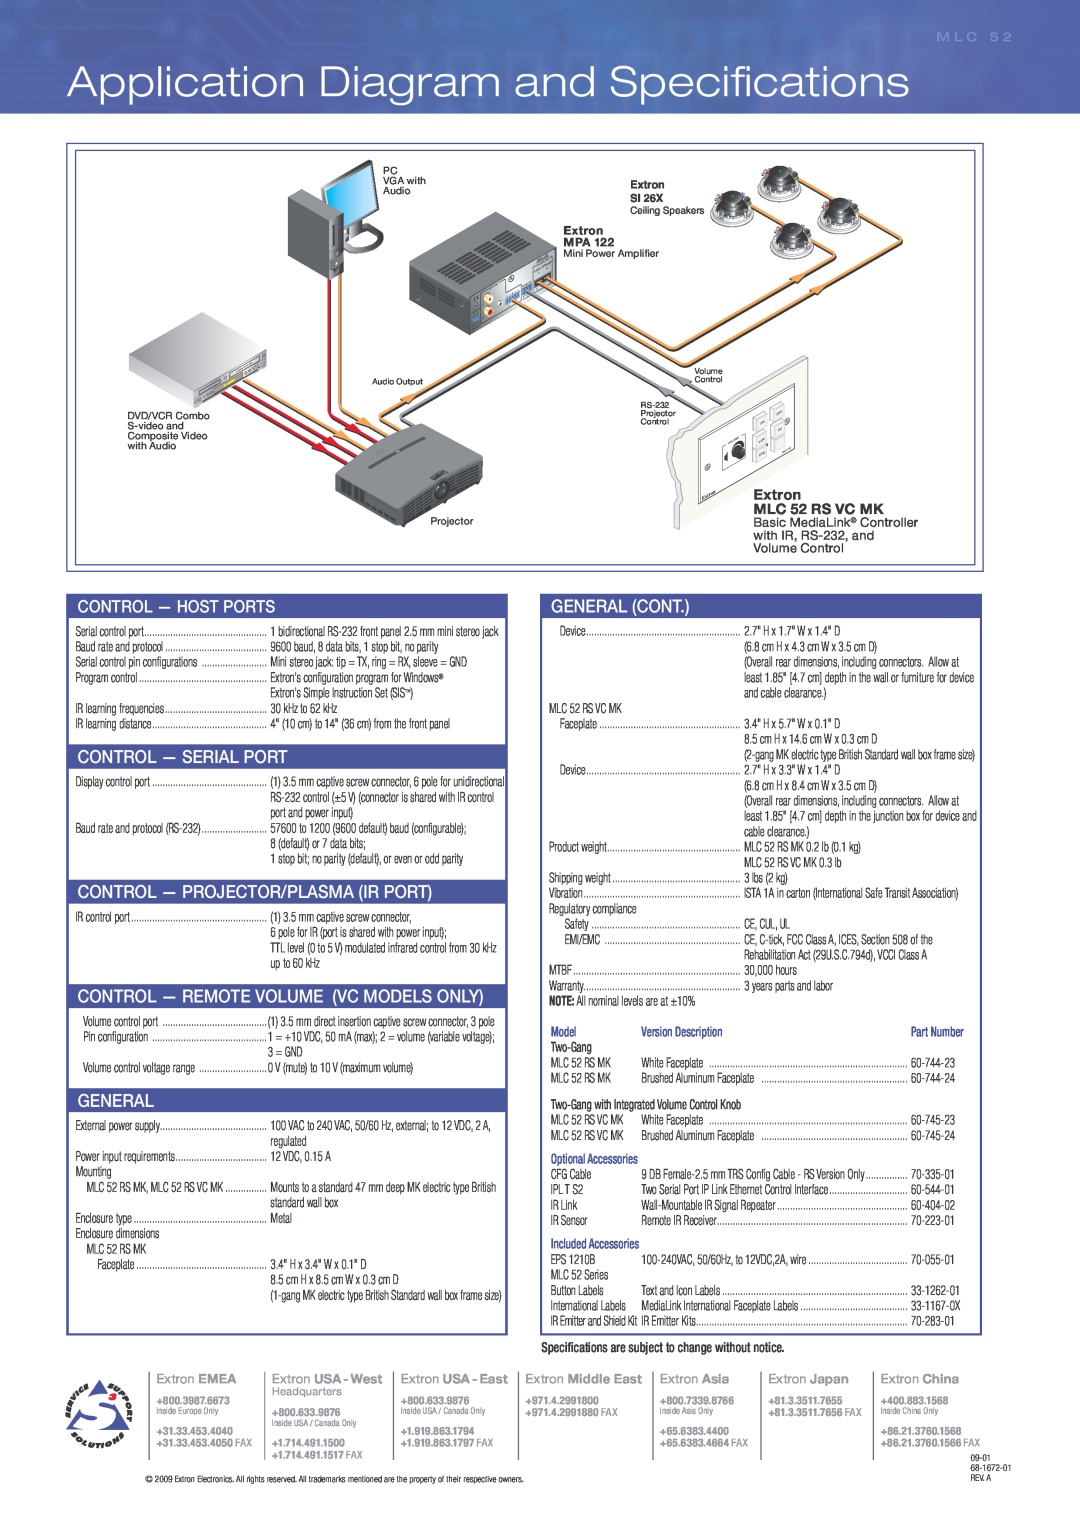 Extron electronic MLC 52 RS VC MK Application Diagram and Speciﬁ cations, specifications, Control - Host Ports, General 